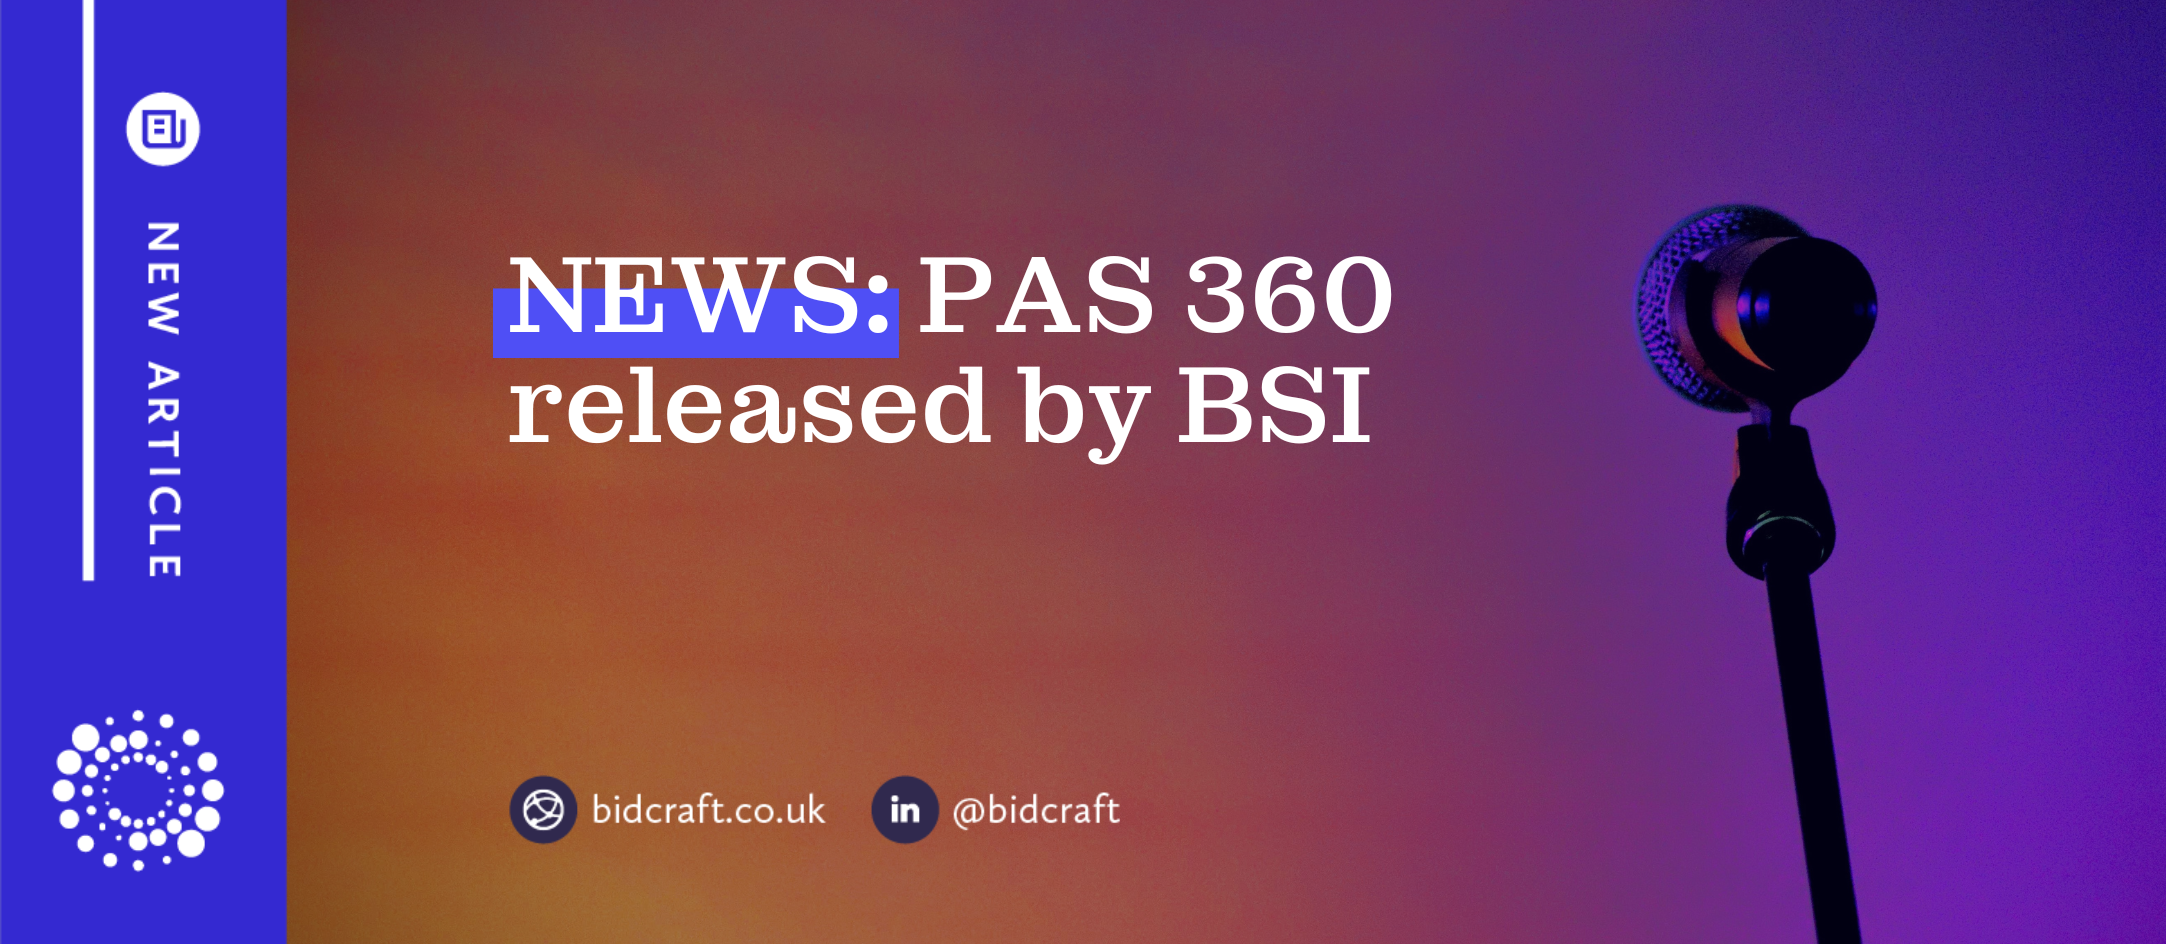 NEWS: PAS 360 released